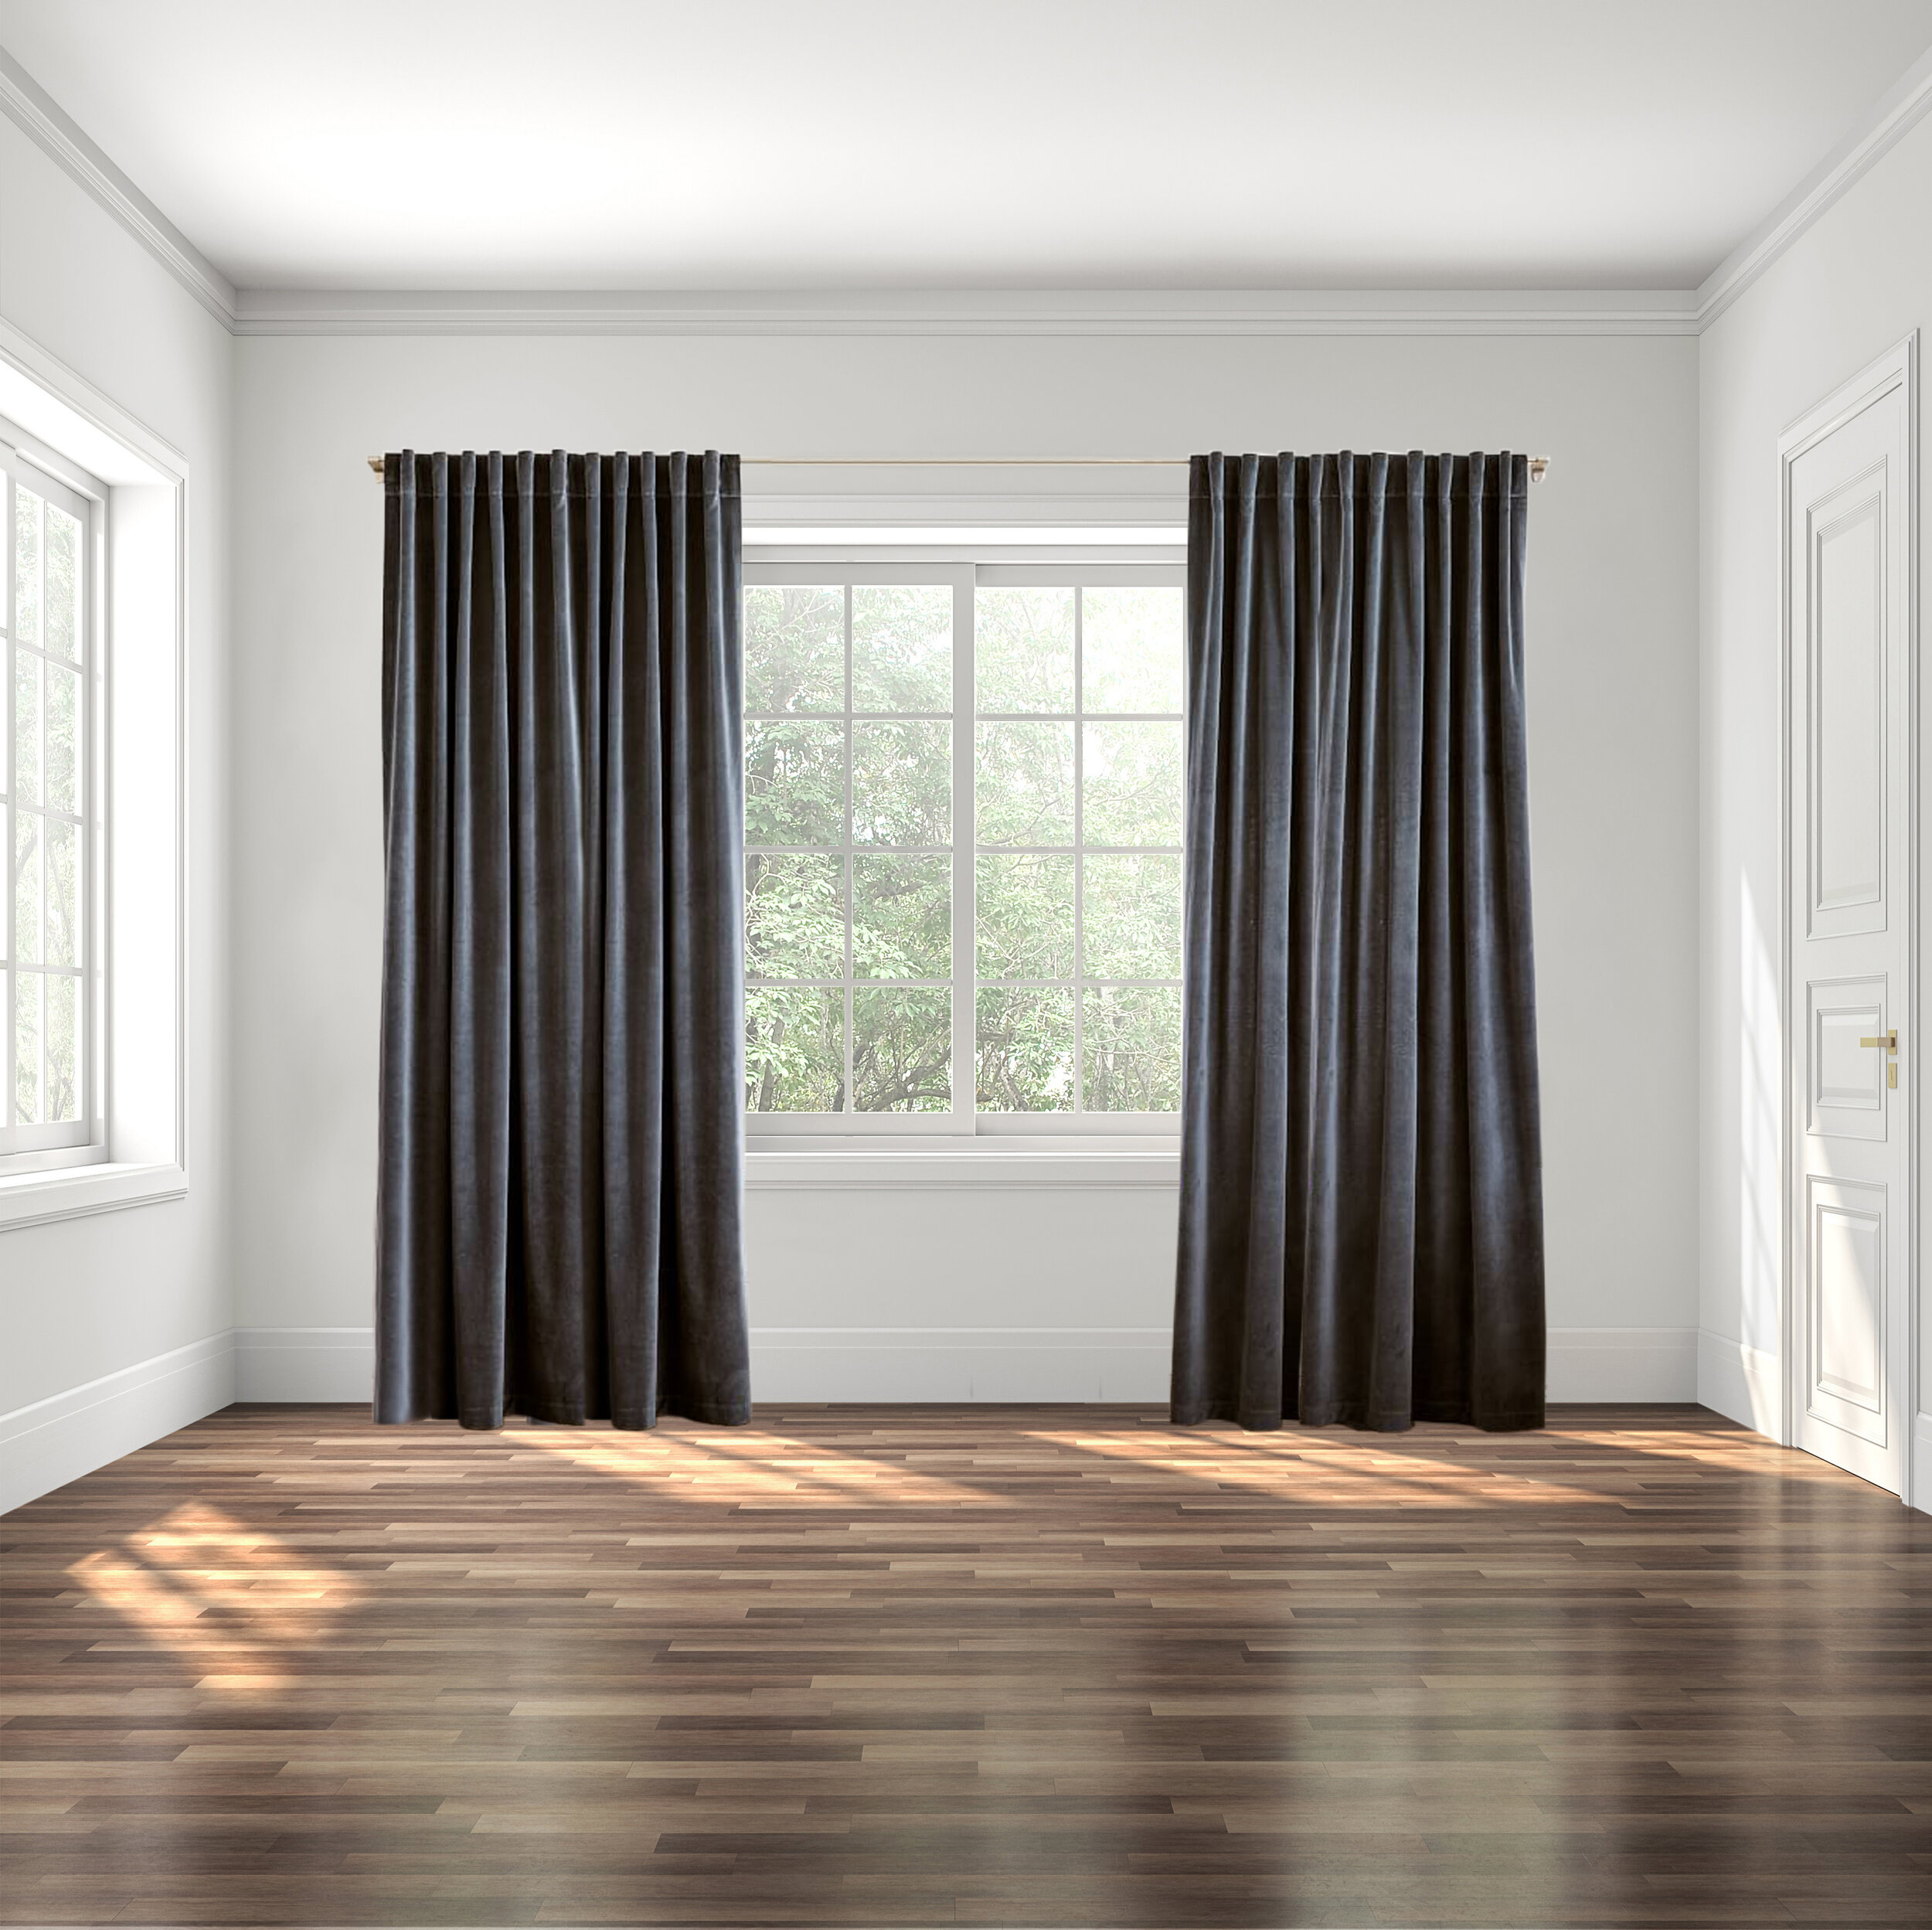 THE DO'S + DON'TS OF CURTAIN PLACEMENT | Nadine Stay